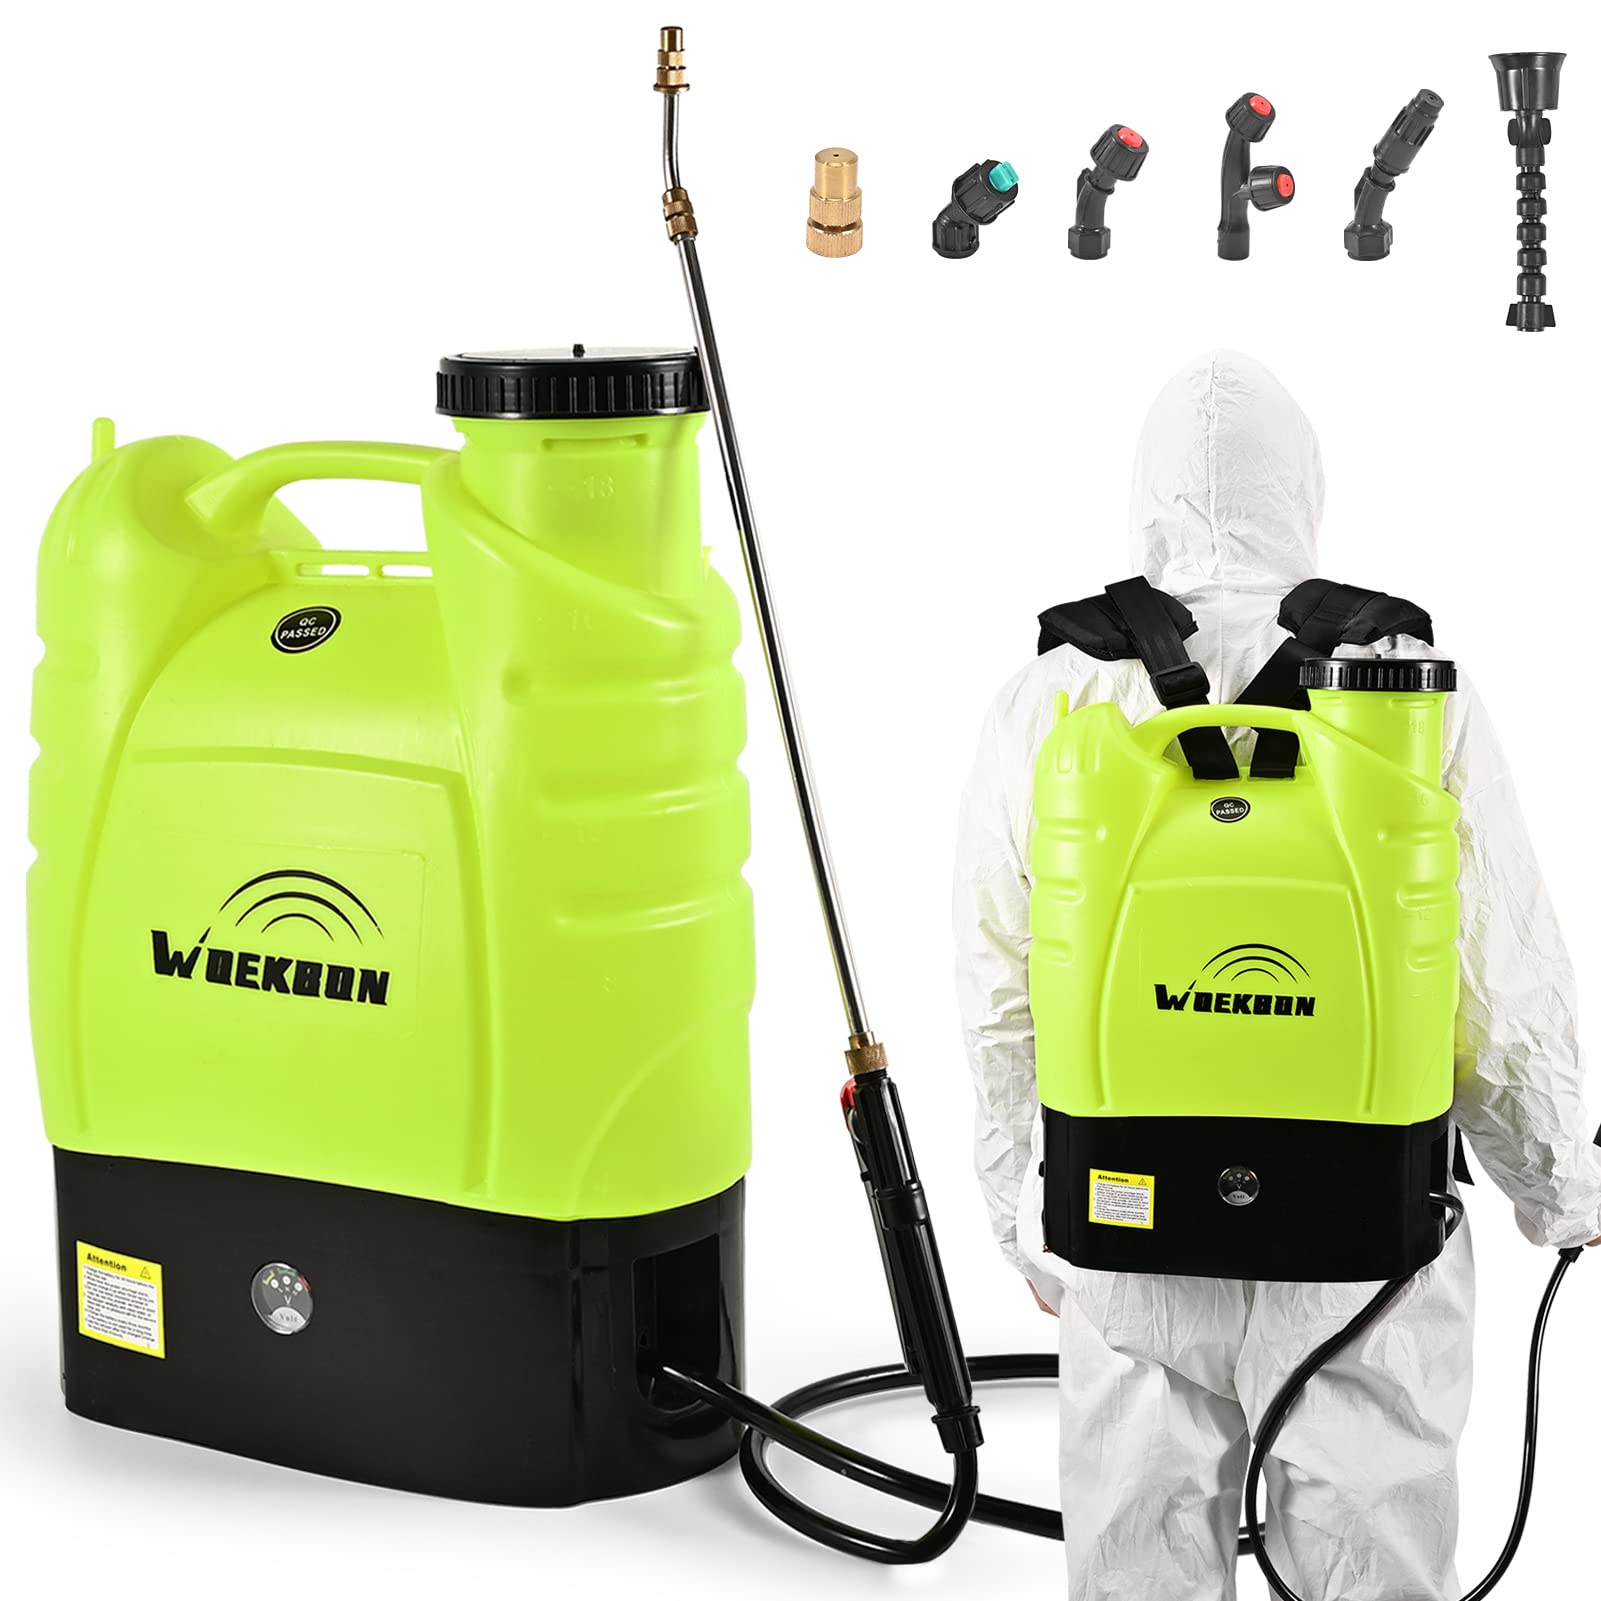 Looking to Buy The Best Backpack Sprayer. Consider The Chapin 61575